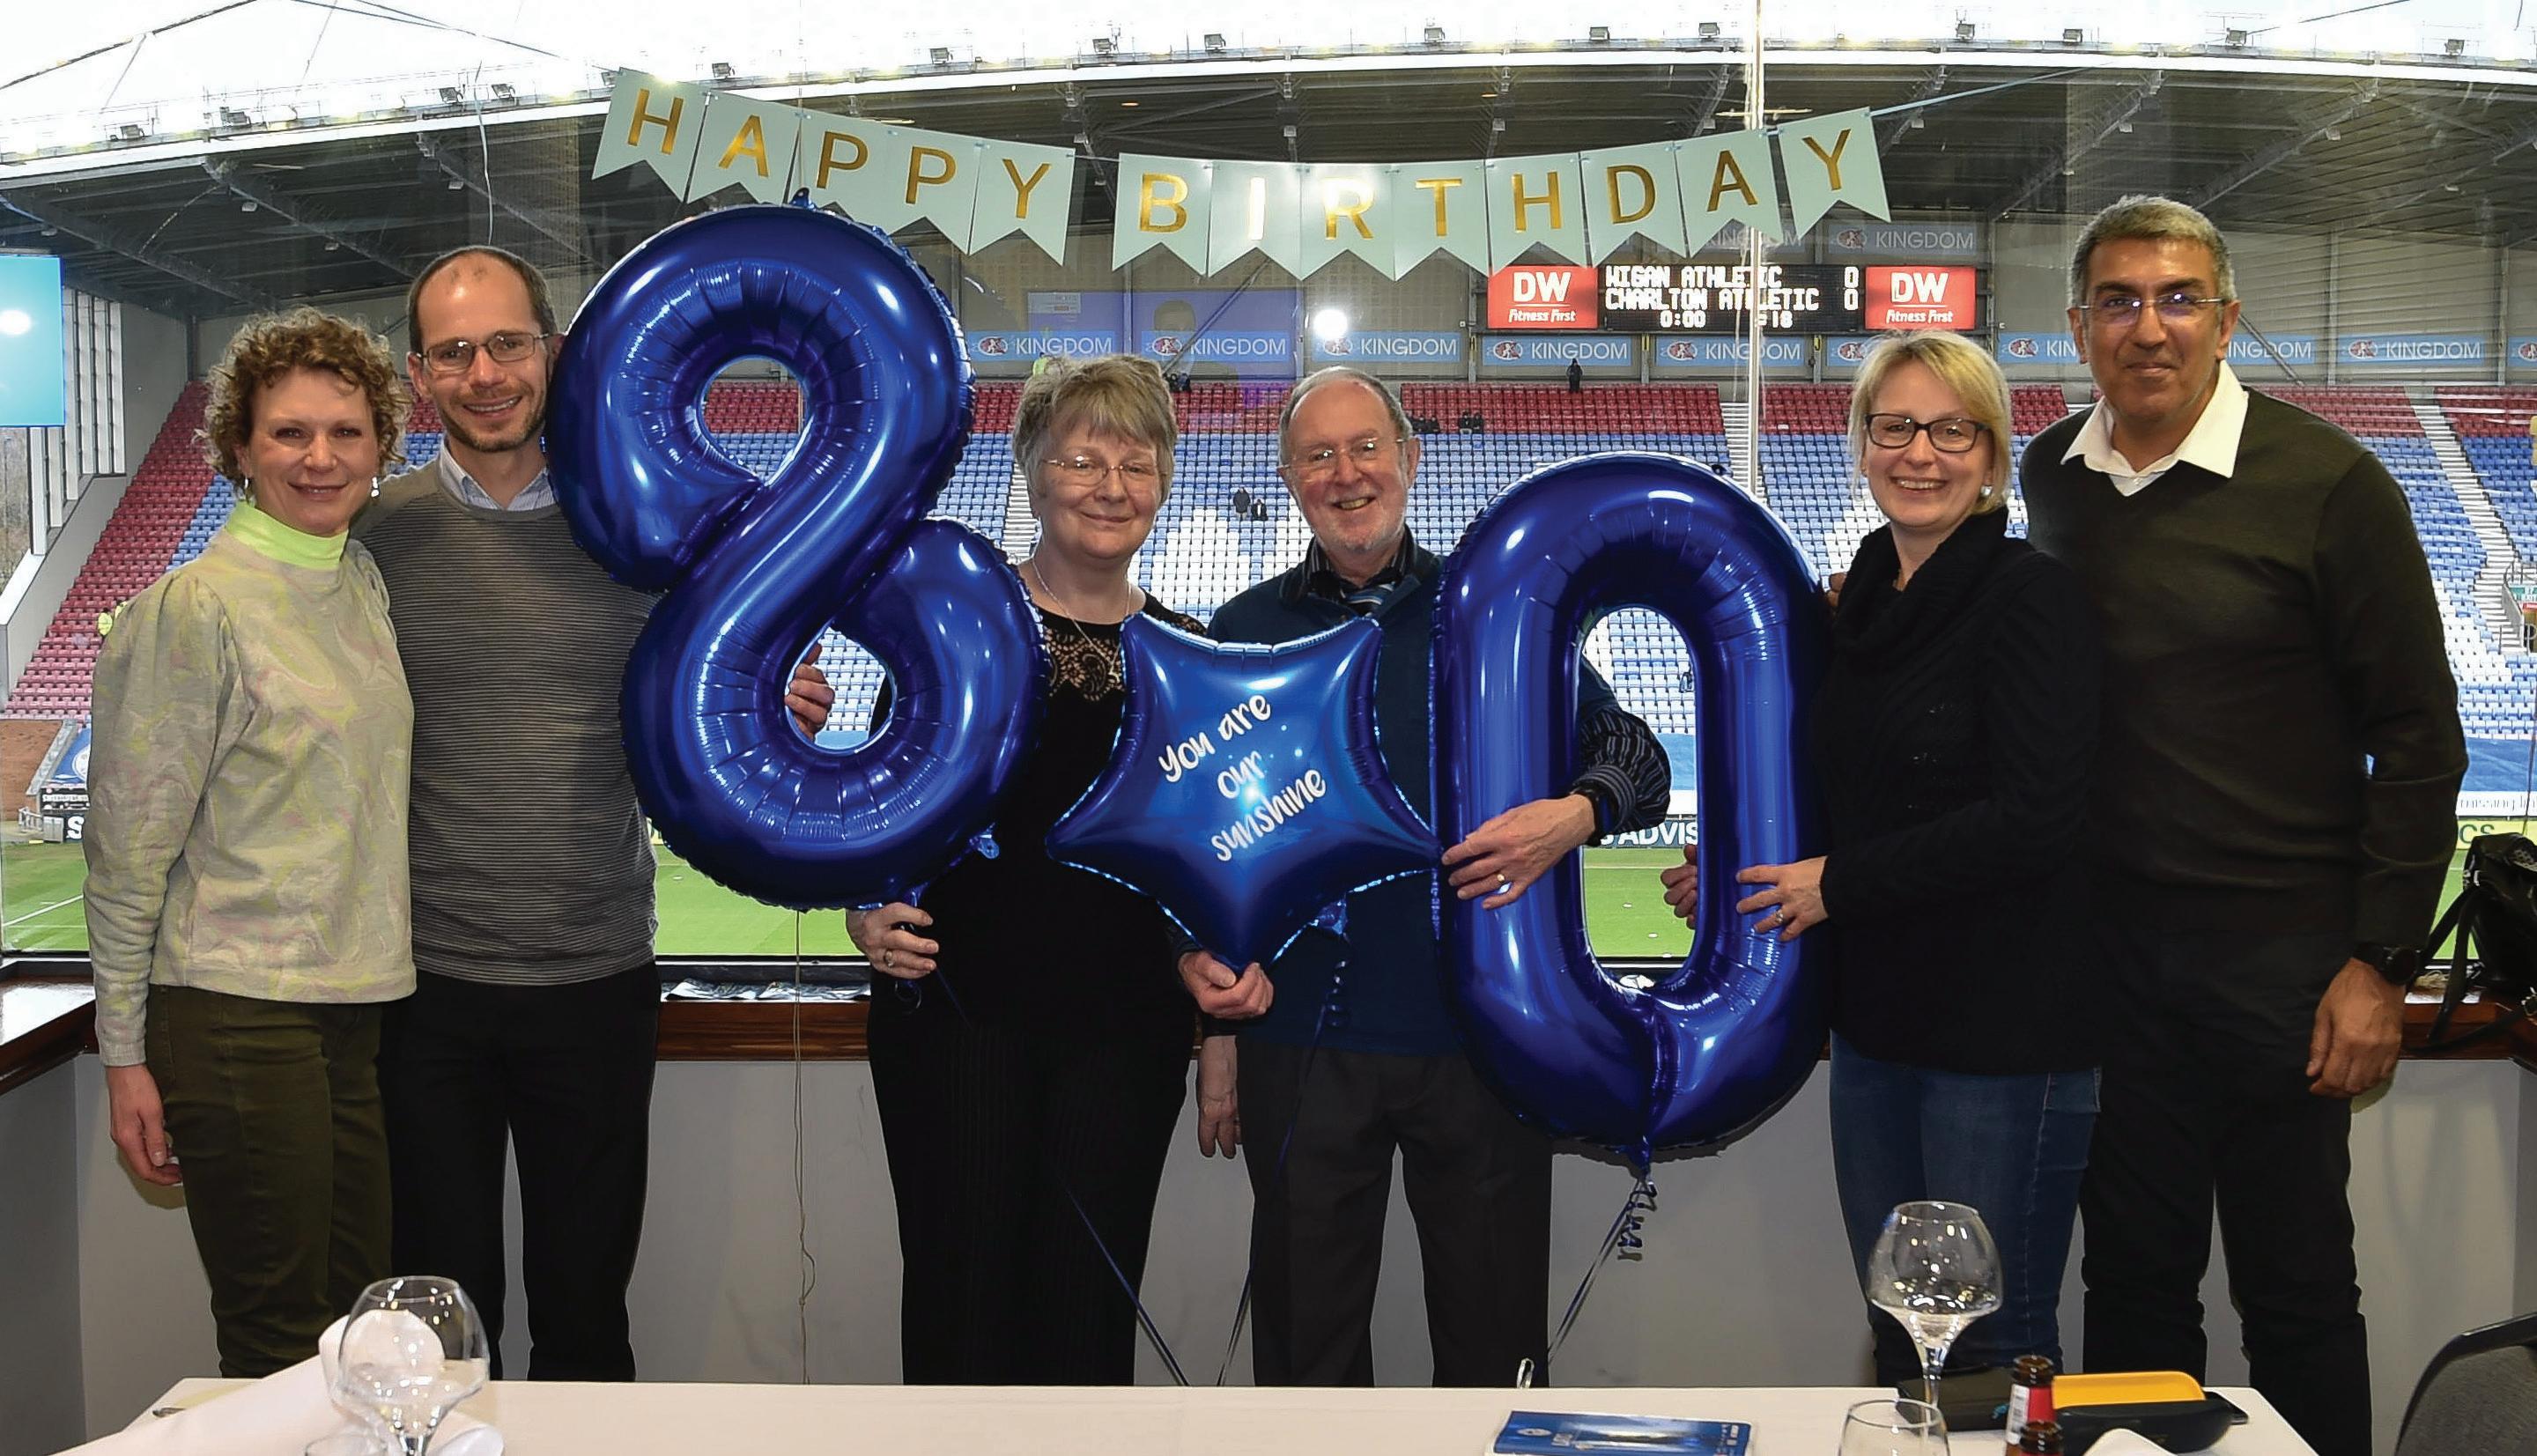 Article from: Wigan Athletic Hospitality 2022/23